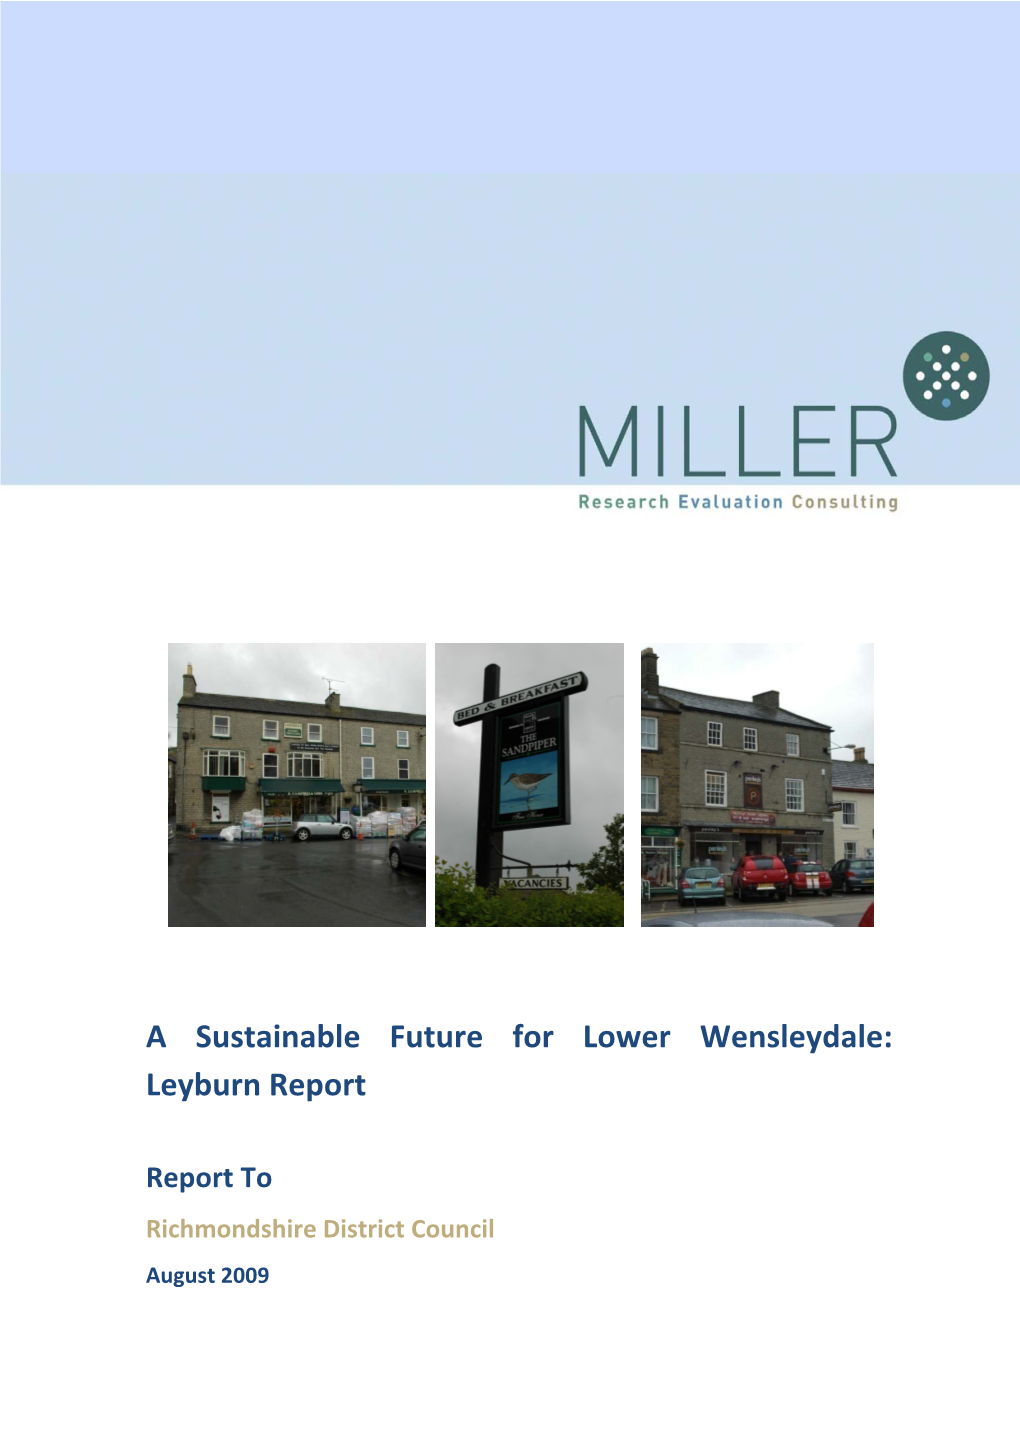 A Sustainable Future for Lower Wensleydale: Leyburn Report